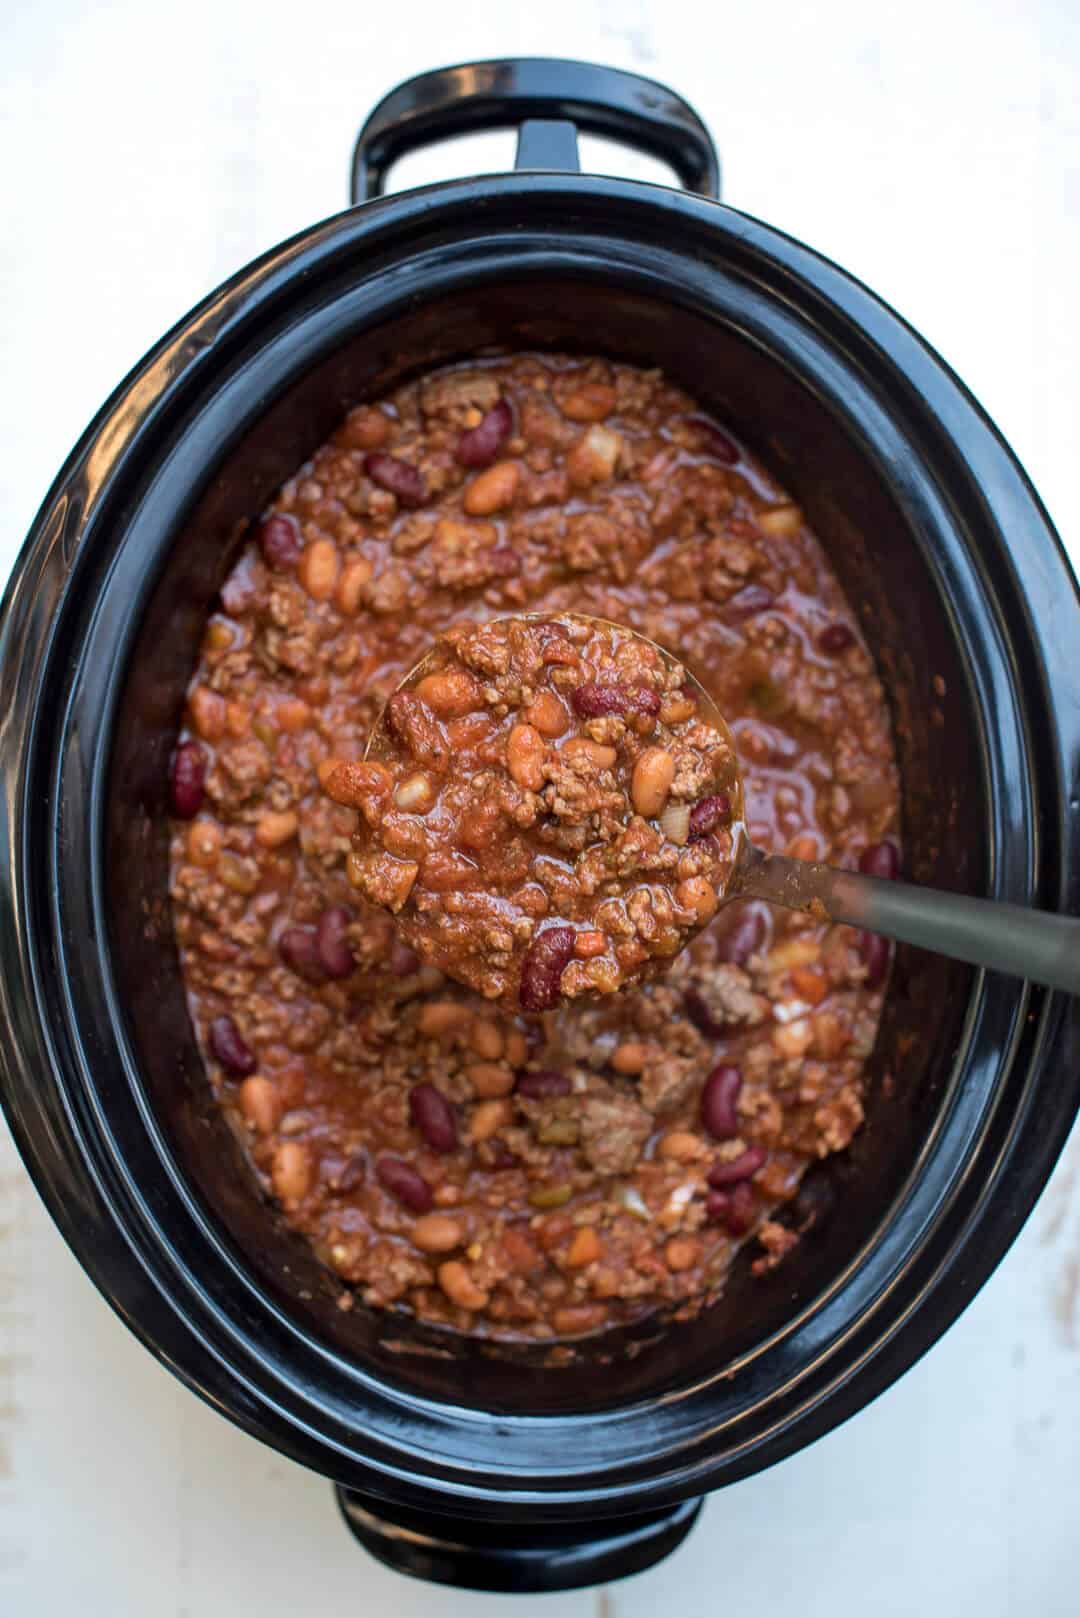 A ladle scooping up chili from a slow cooker insert.